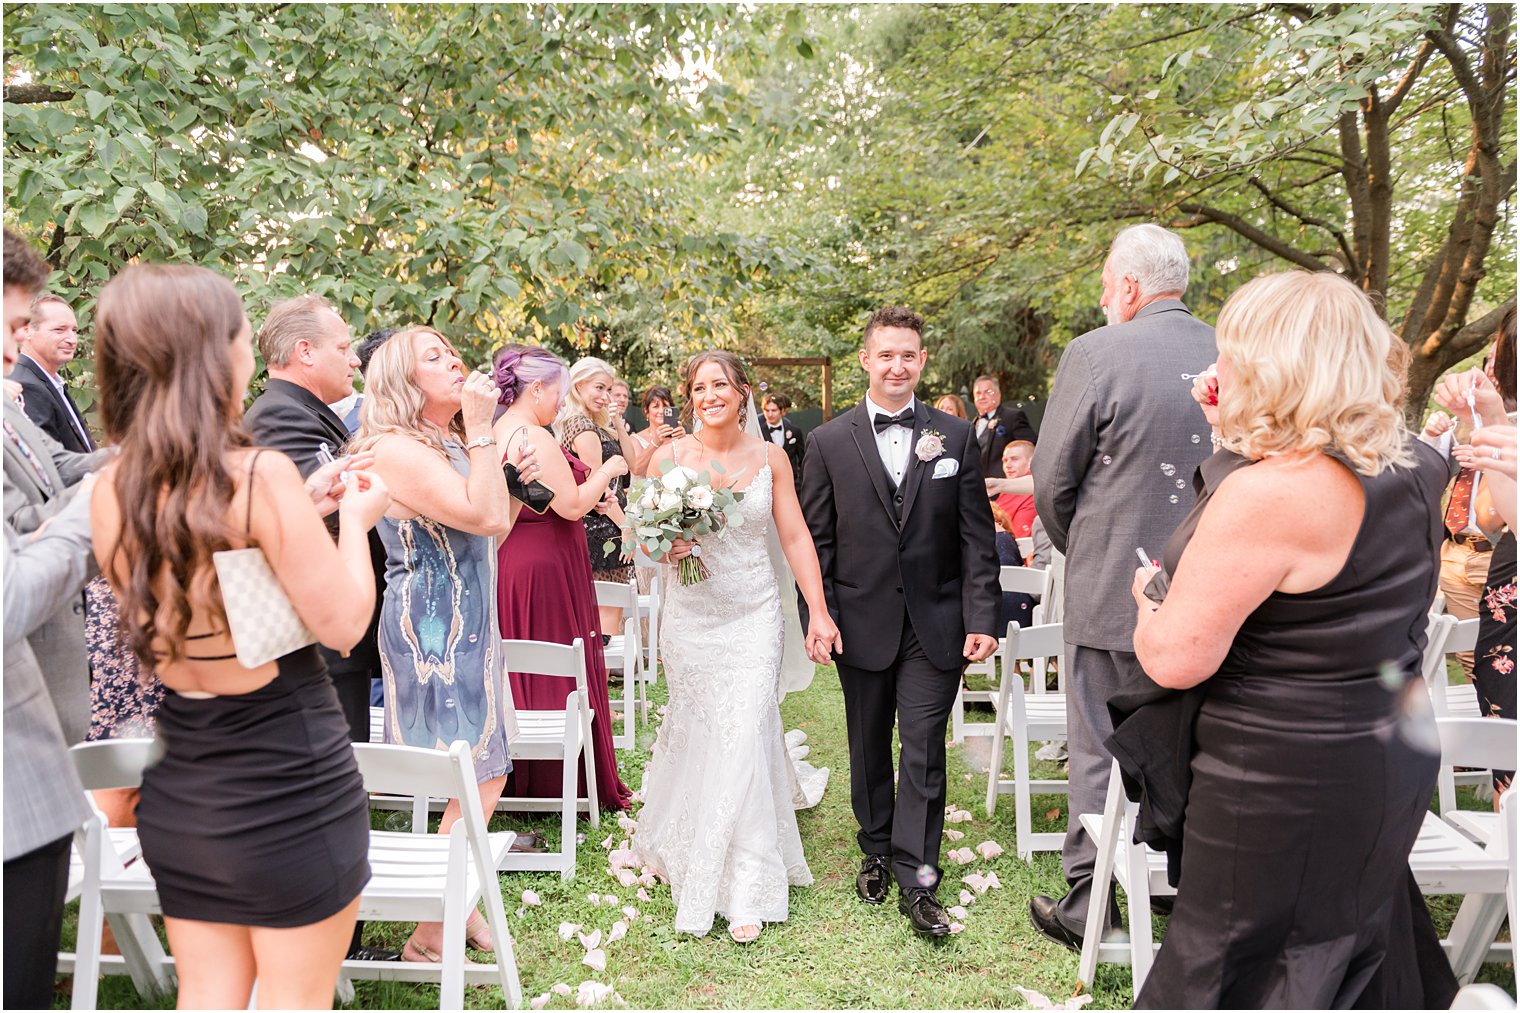 newlyweds walk up aisle after wedding ceremony in garden at The Inn at Fernbrook Farms